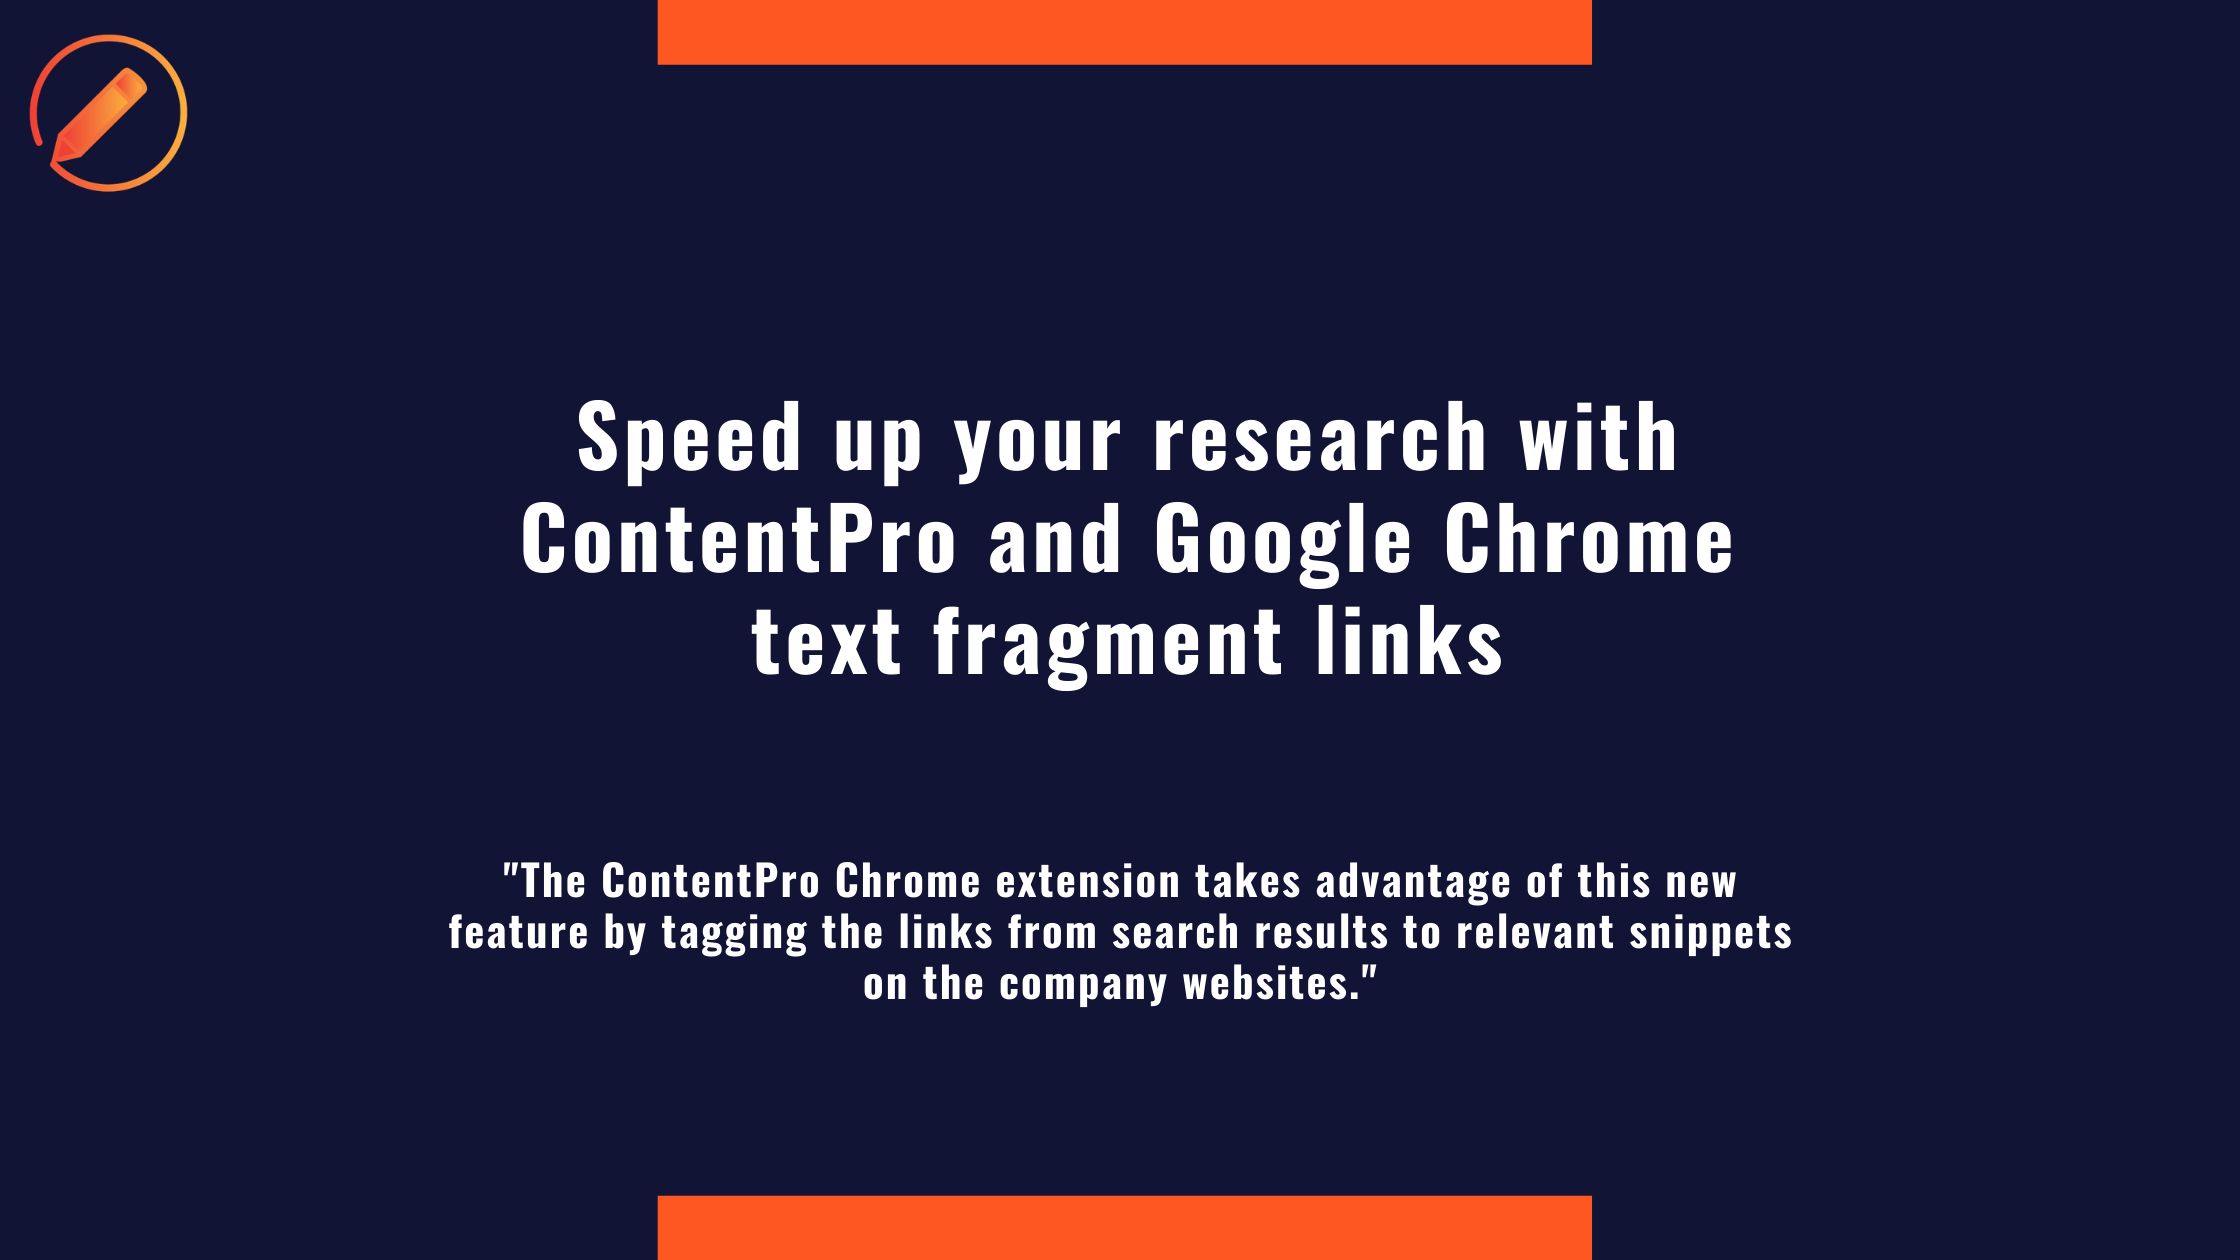 Speed up your research with ContentPro and Google Chrome text fragment links